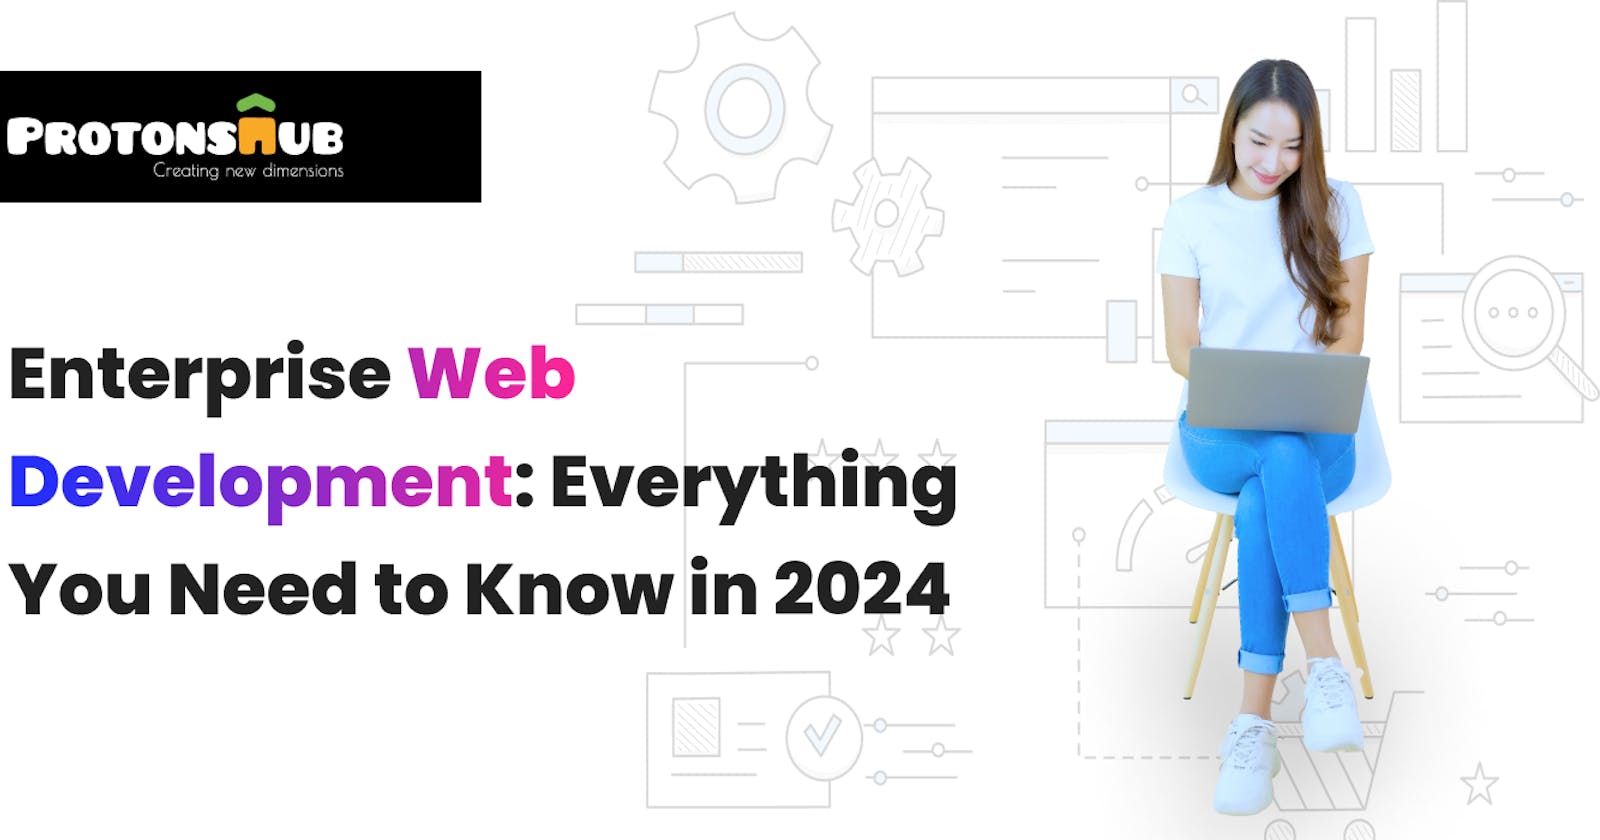 Enterprise Web Development: Everything You Need to Know in 2024